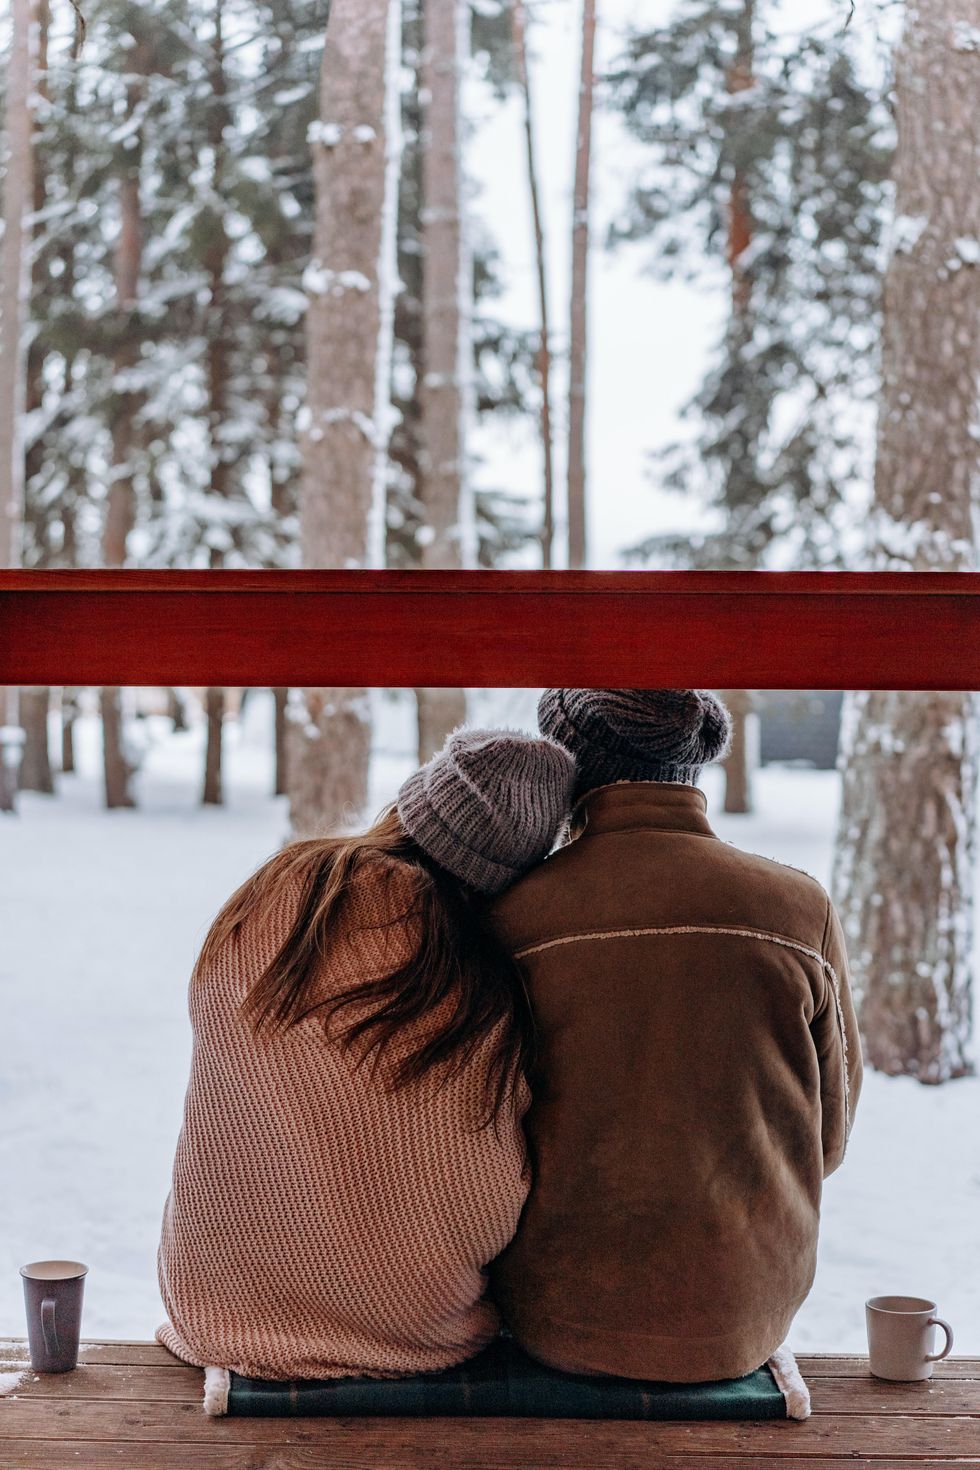 15 Date Ideas For You And Your Significant Other This Holiday Season